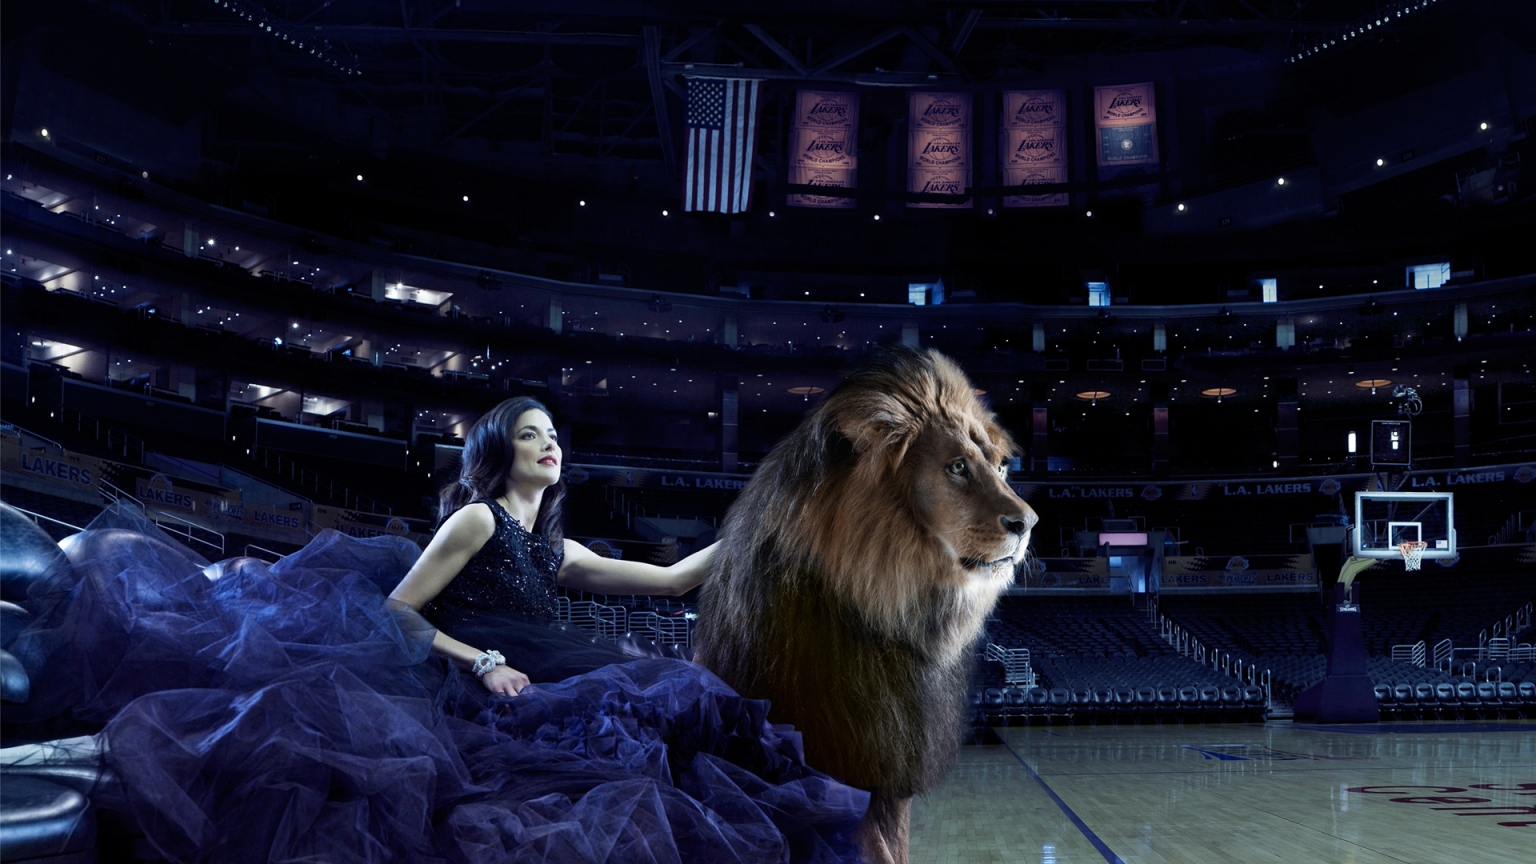 Woman and Lion for 1536 x 864 HDTV resolution